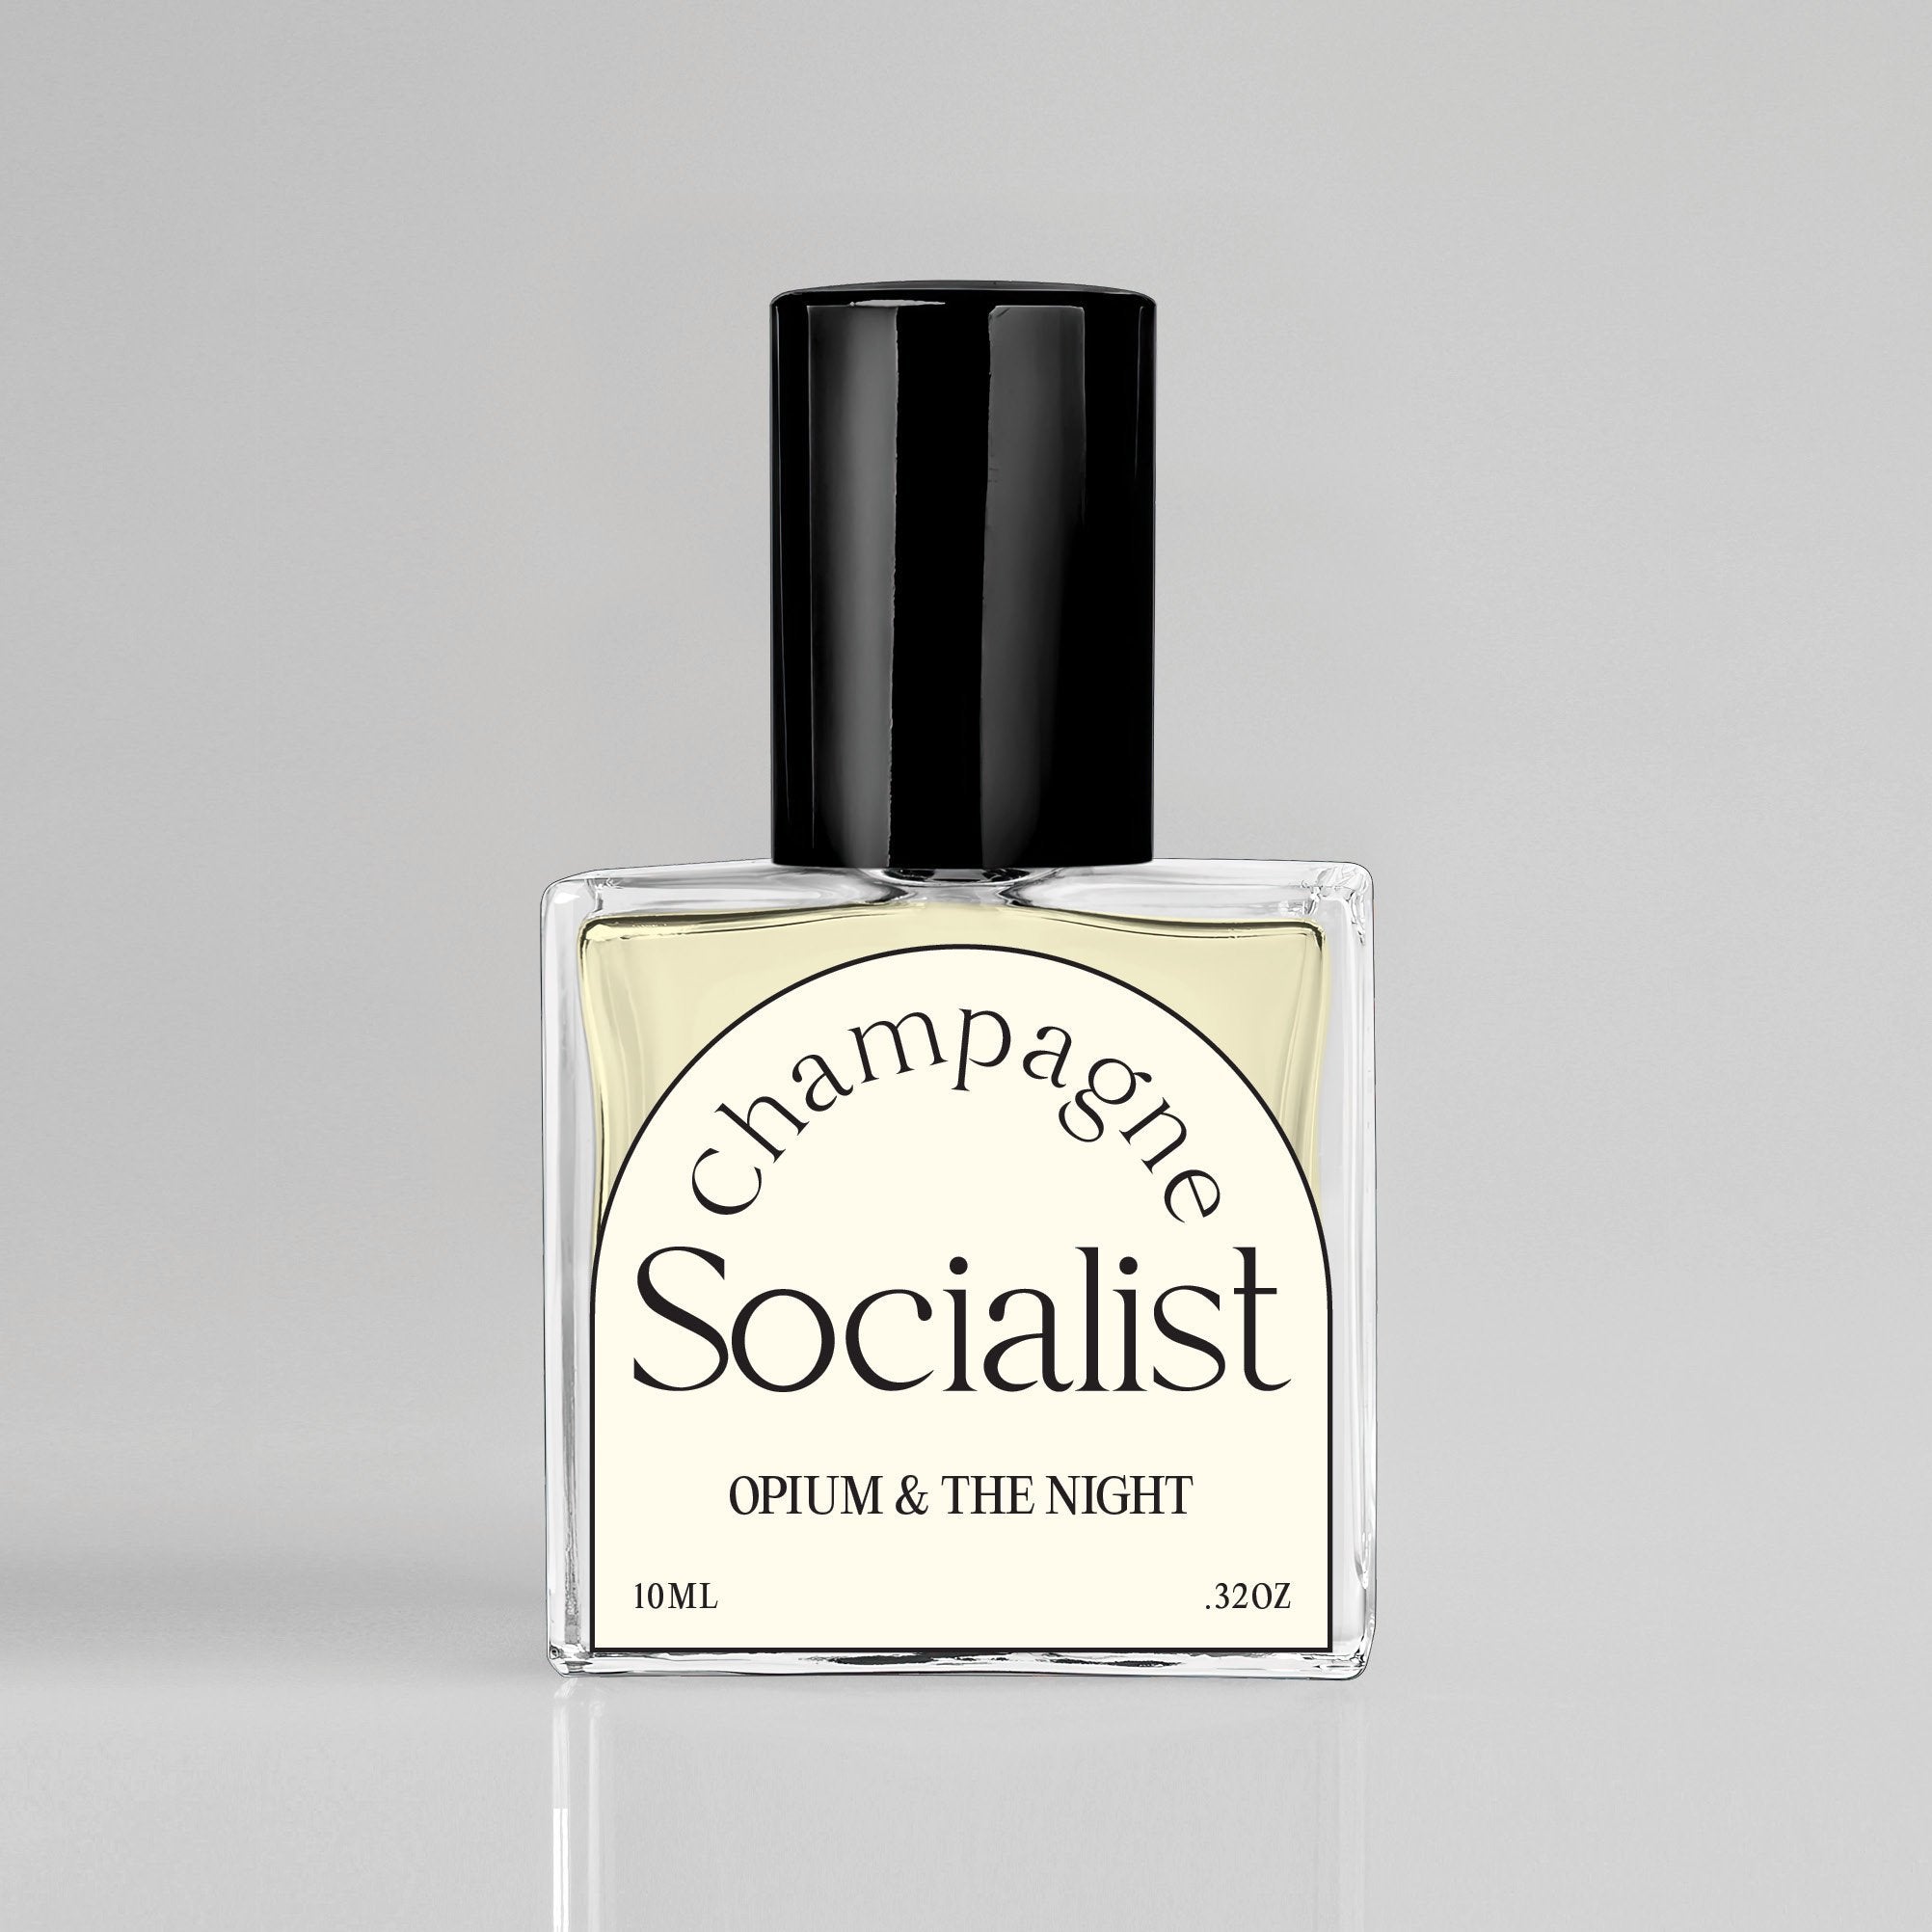 Champagne Socialist Opium and the Night Oil